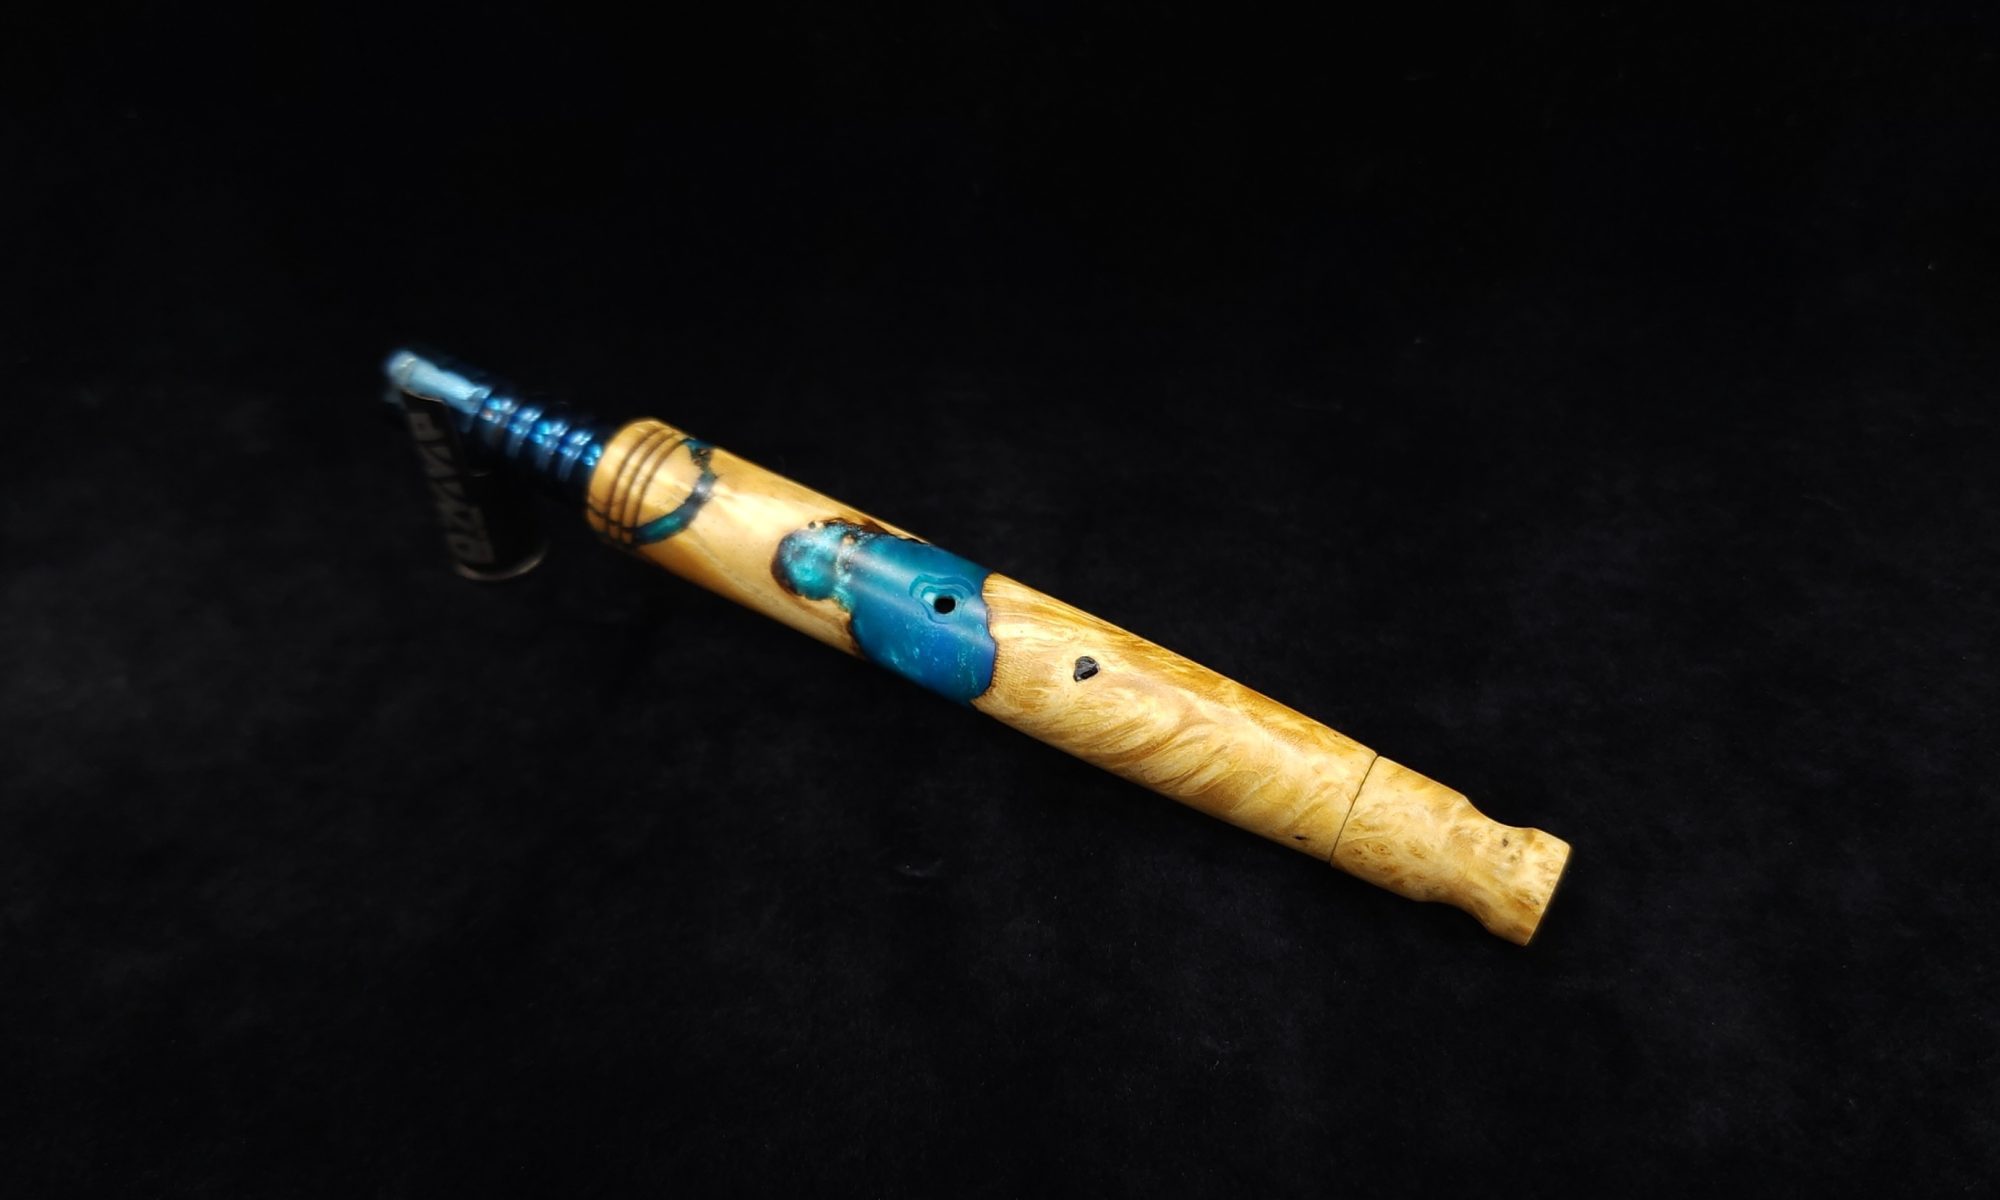 This image portrays Burl Hybrid XL-Straight Taper(Slim Style)Dynavap Stem + Mouthpiece by Dovetail Woodwork.